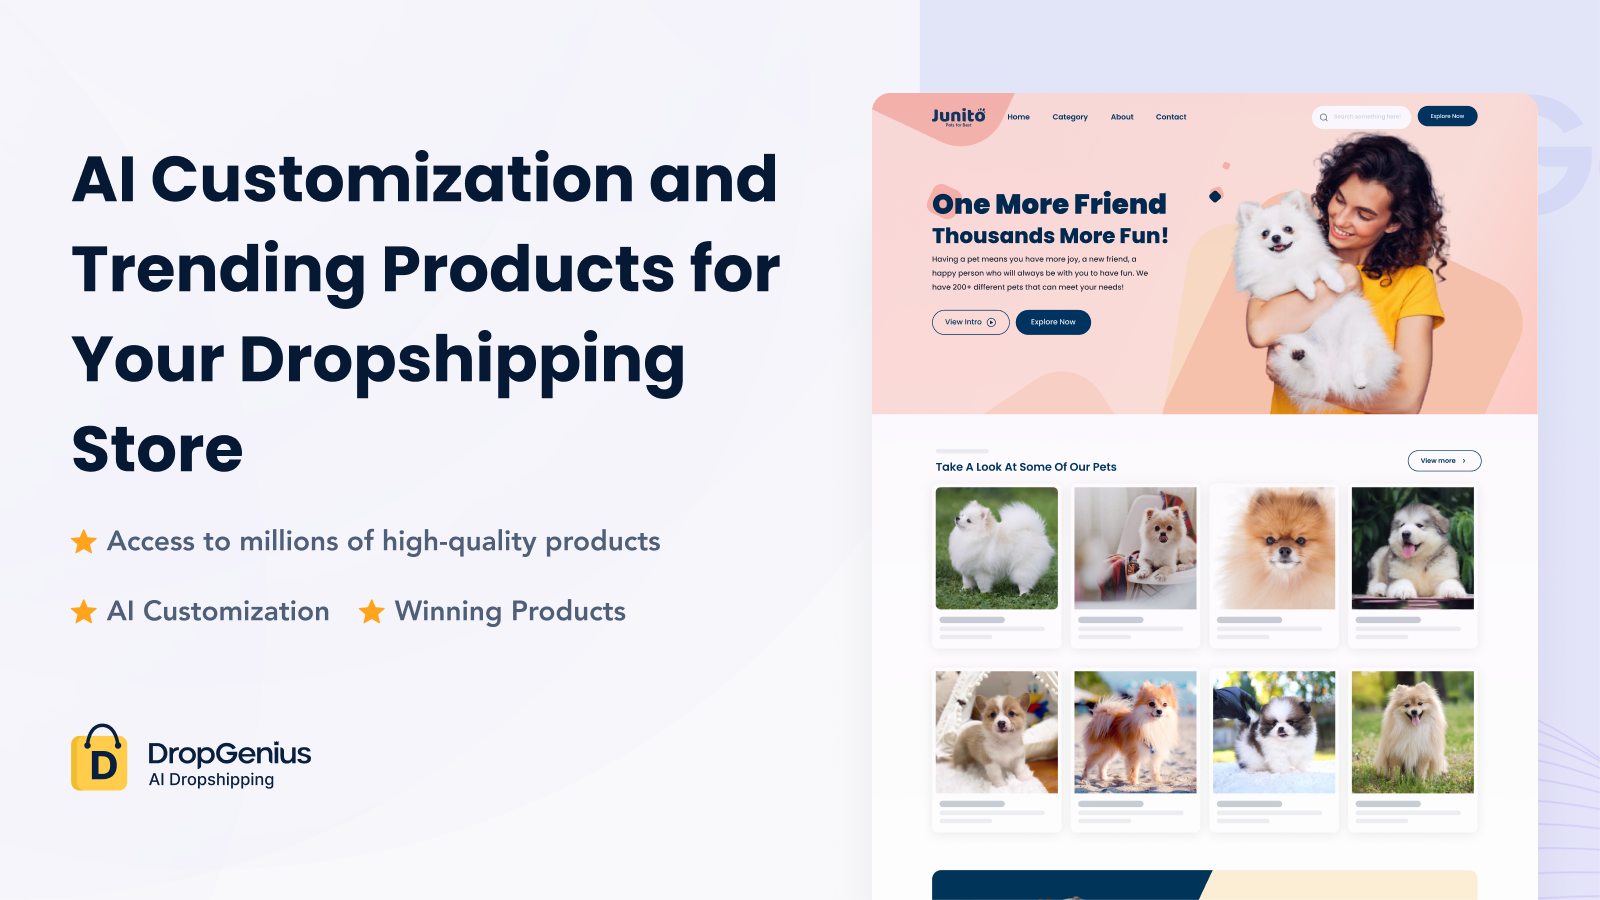 AI Customization and Trending Products for Dropshipping